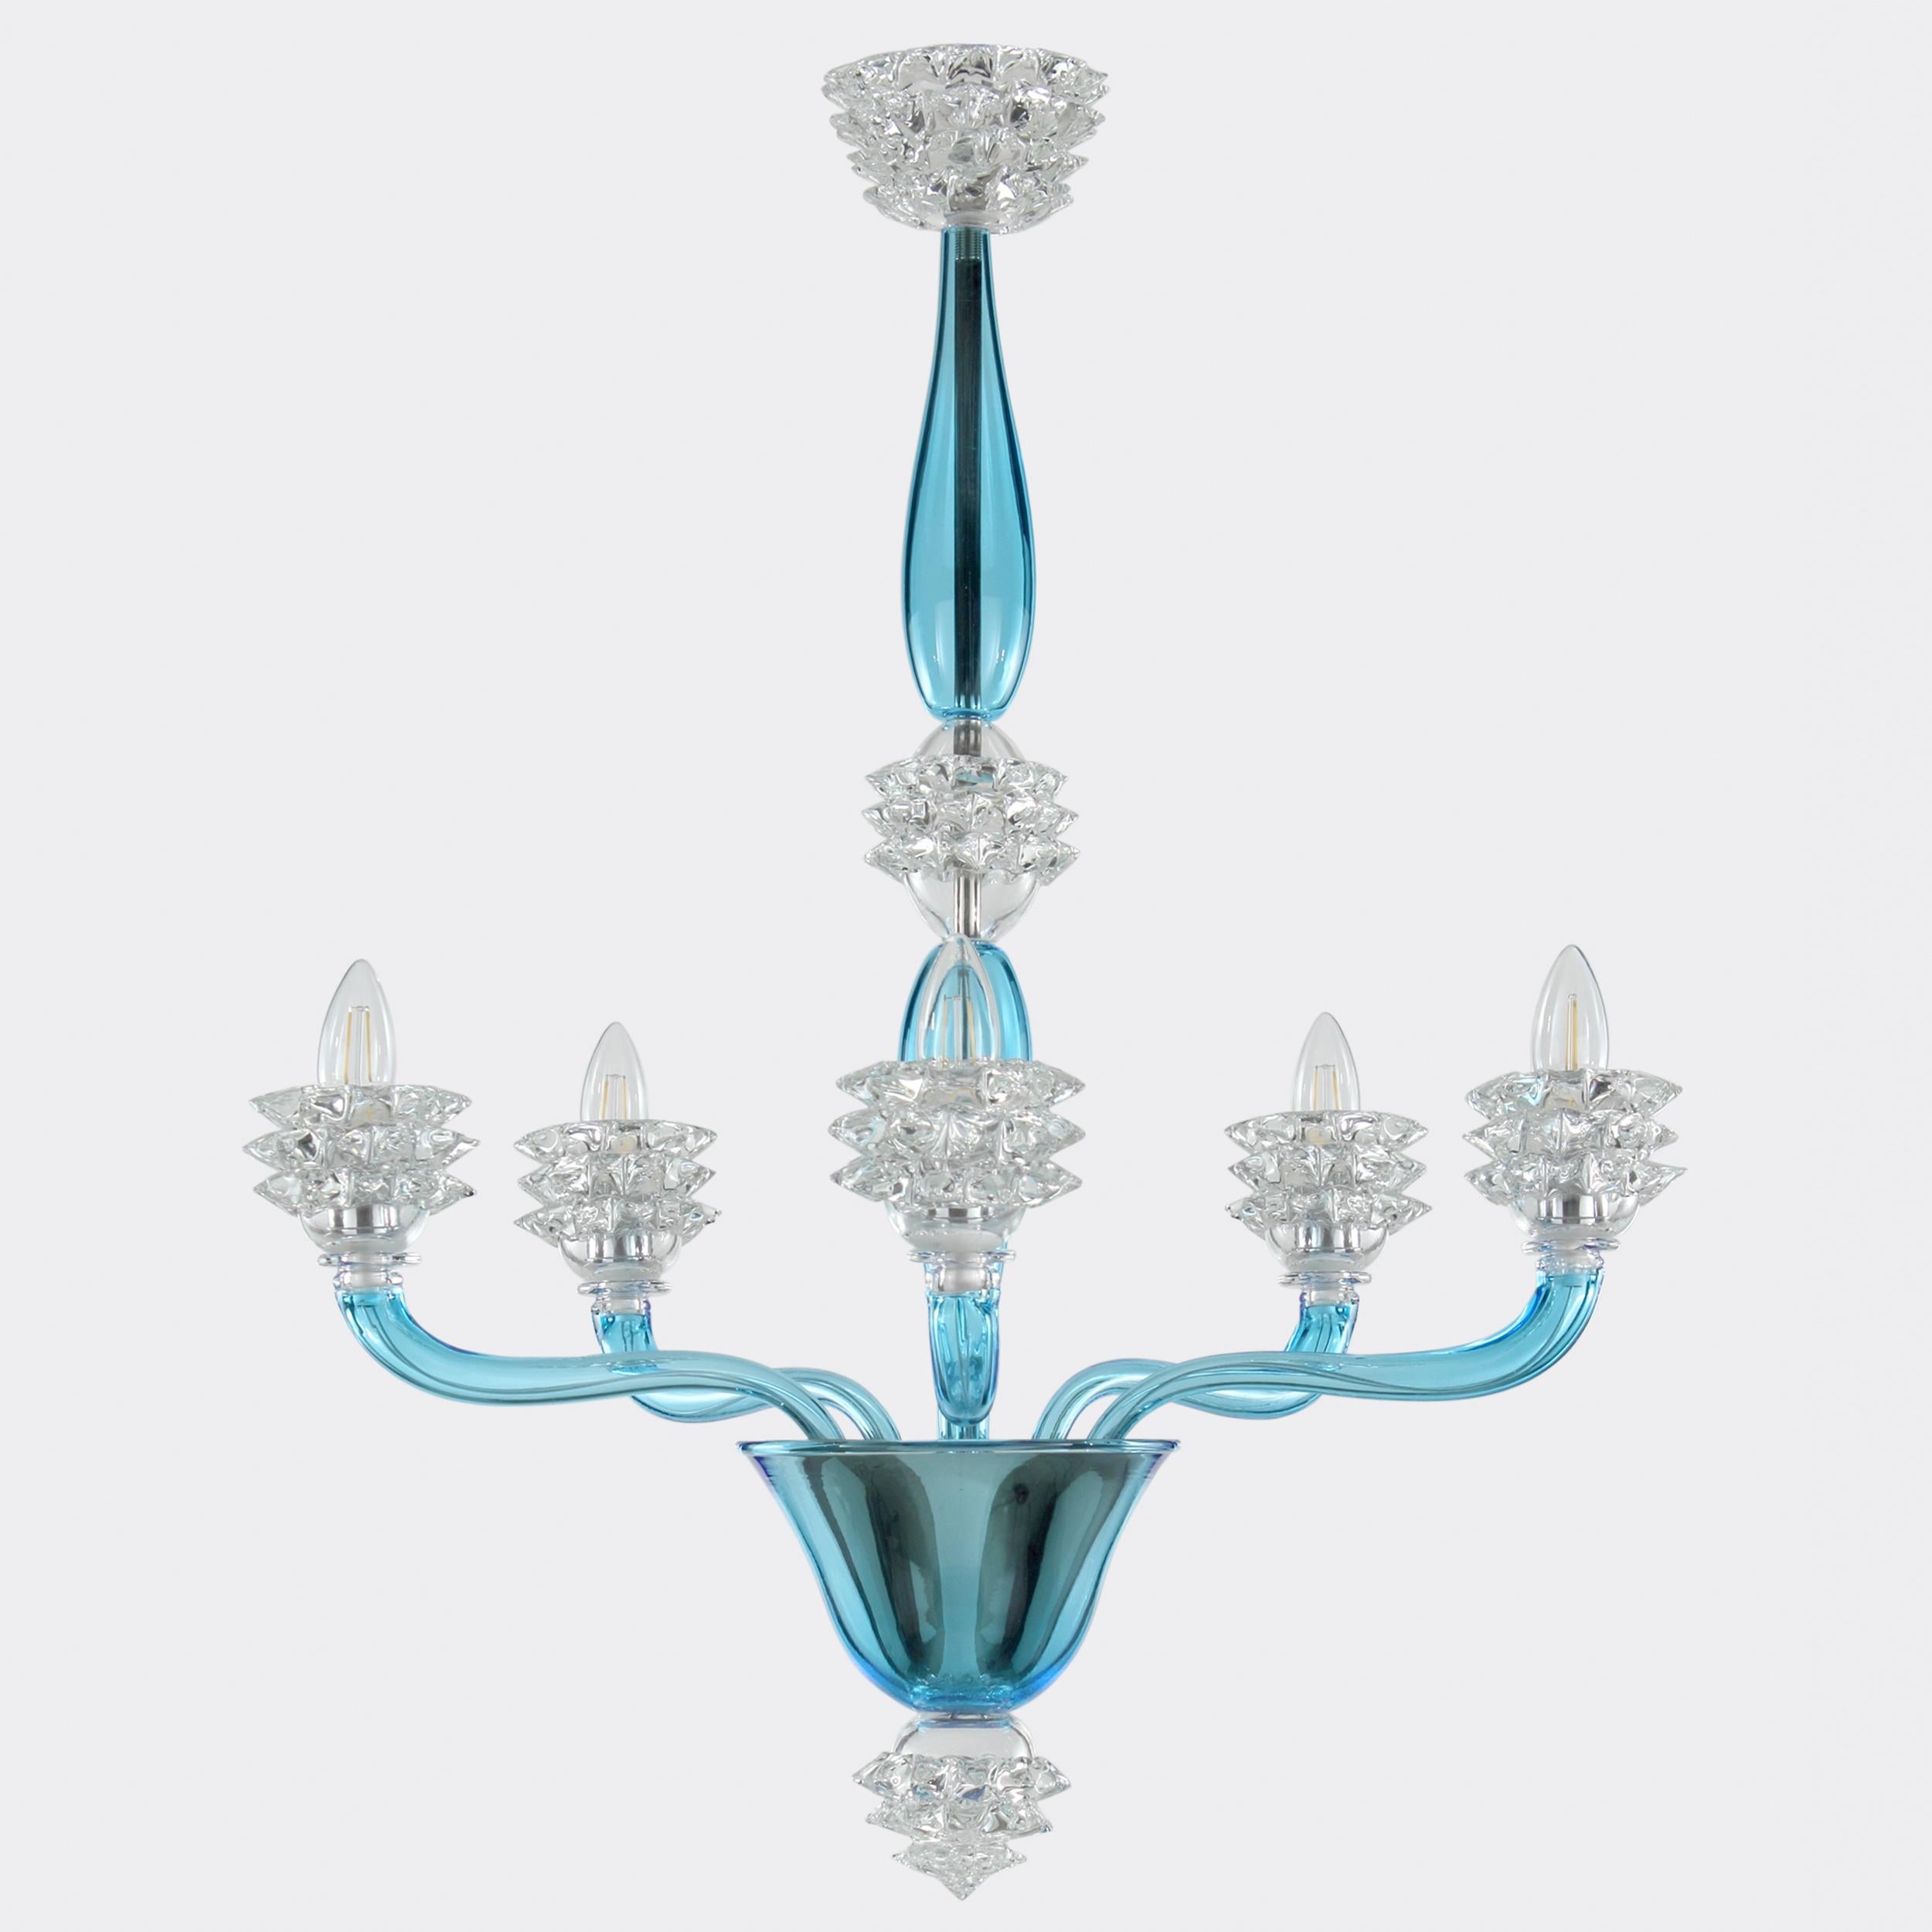 The Diamante blown glass chandeliers by Multiforme are characterized by a slender central element.
The arms, central column and final cup are made of flawless smooth glass. The standout elements of this chandelier are the cups, which are created